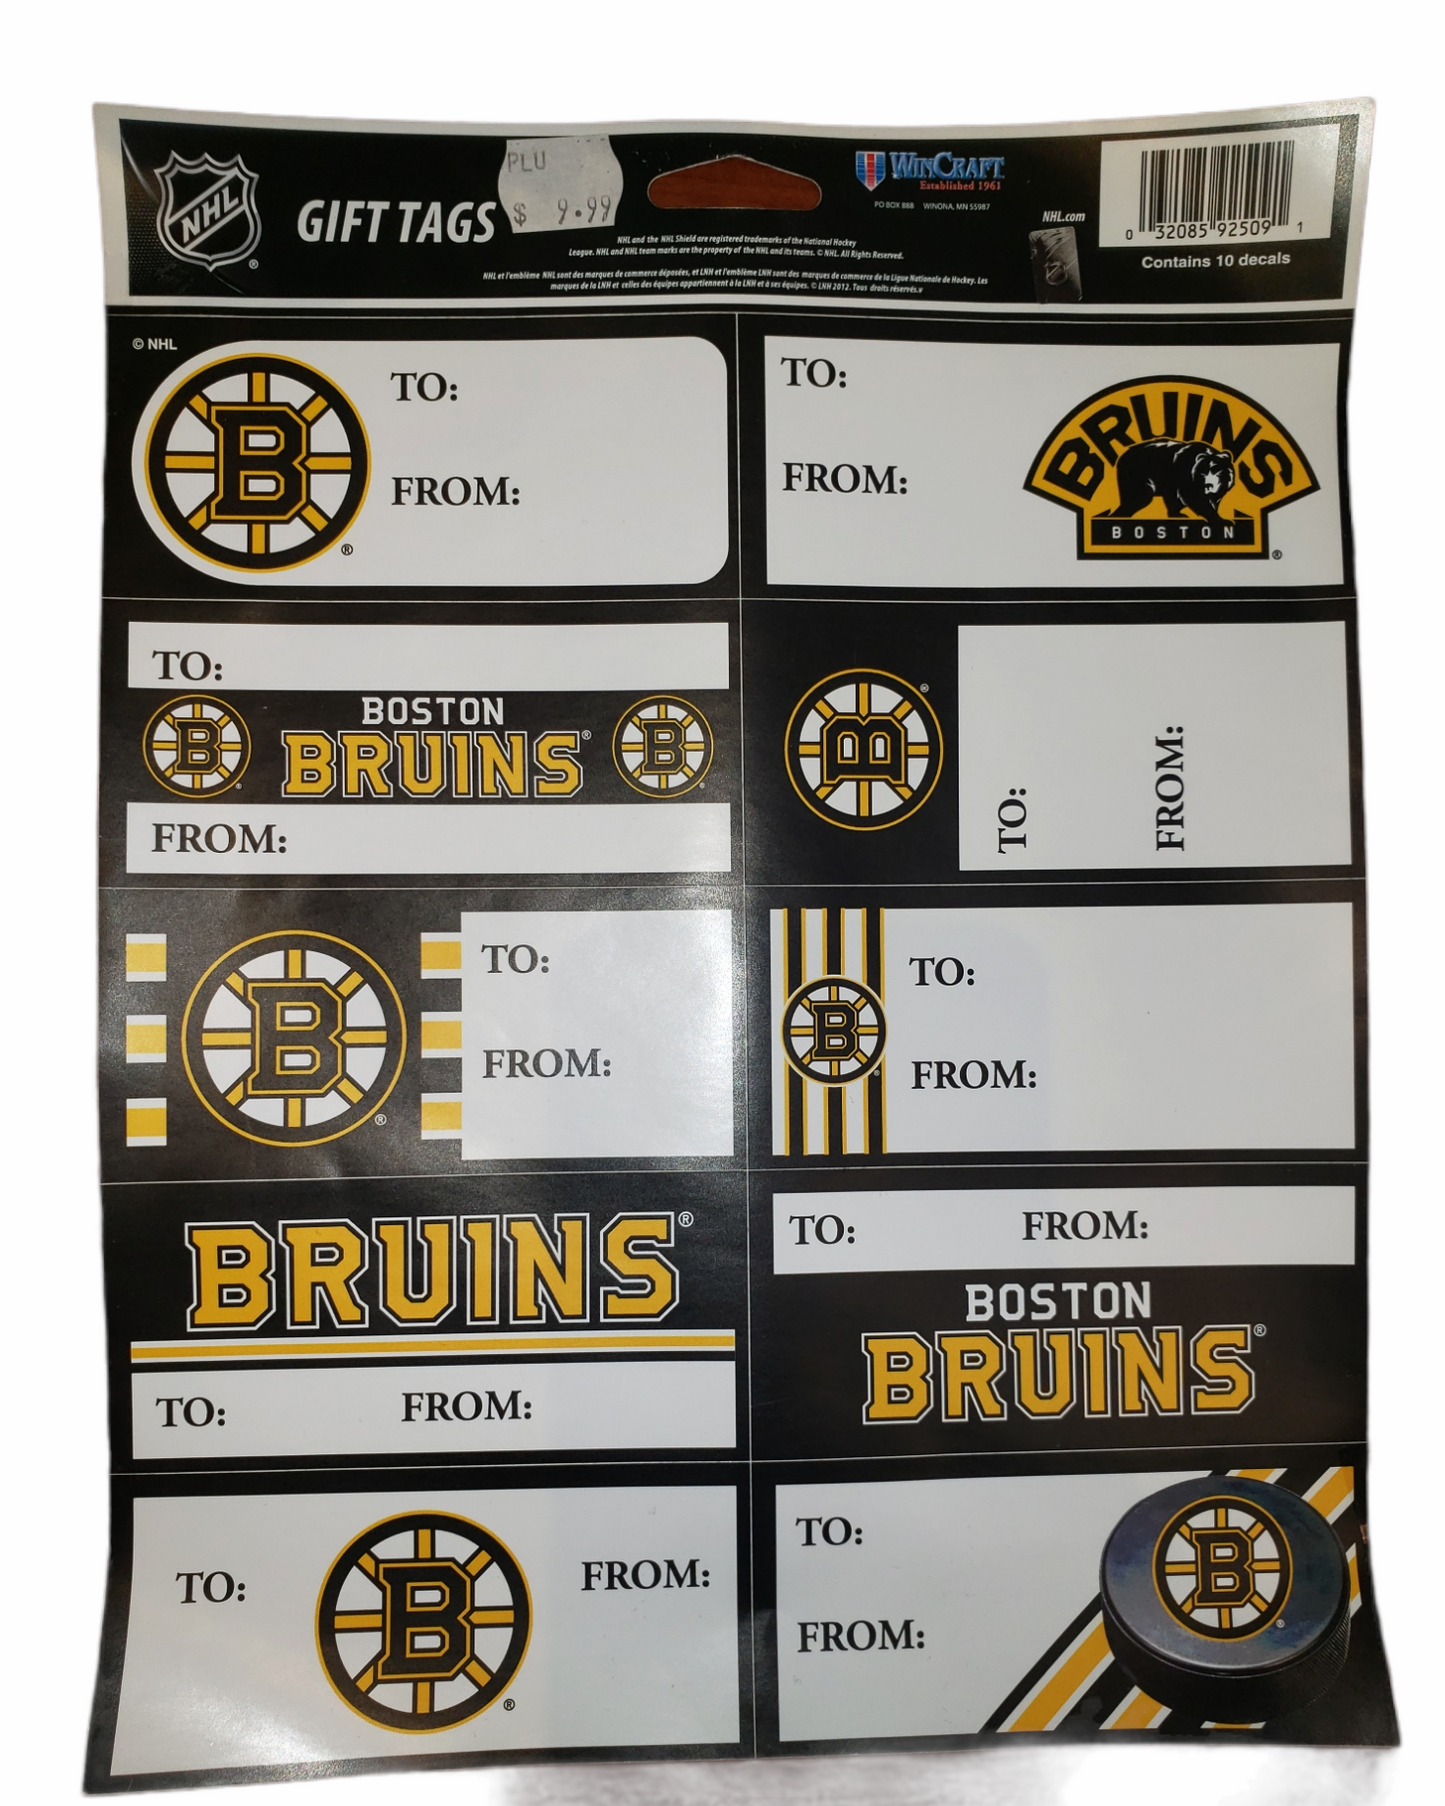 NHL Gift Tags Decals Bruins